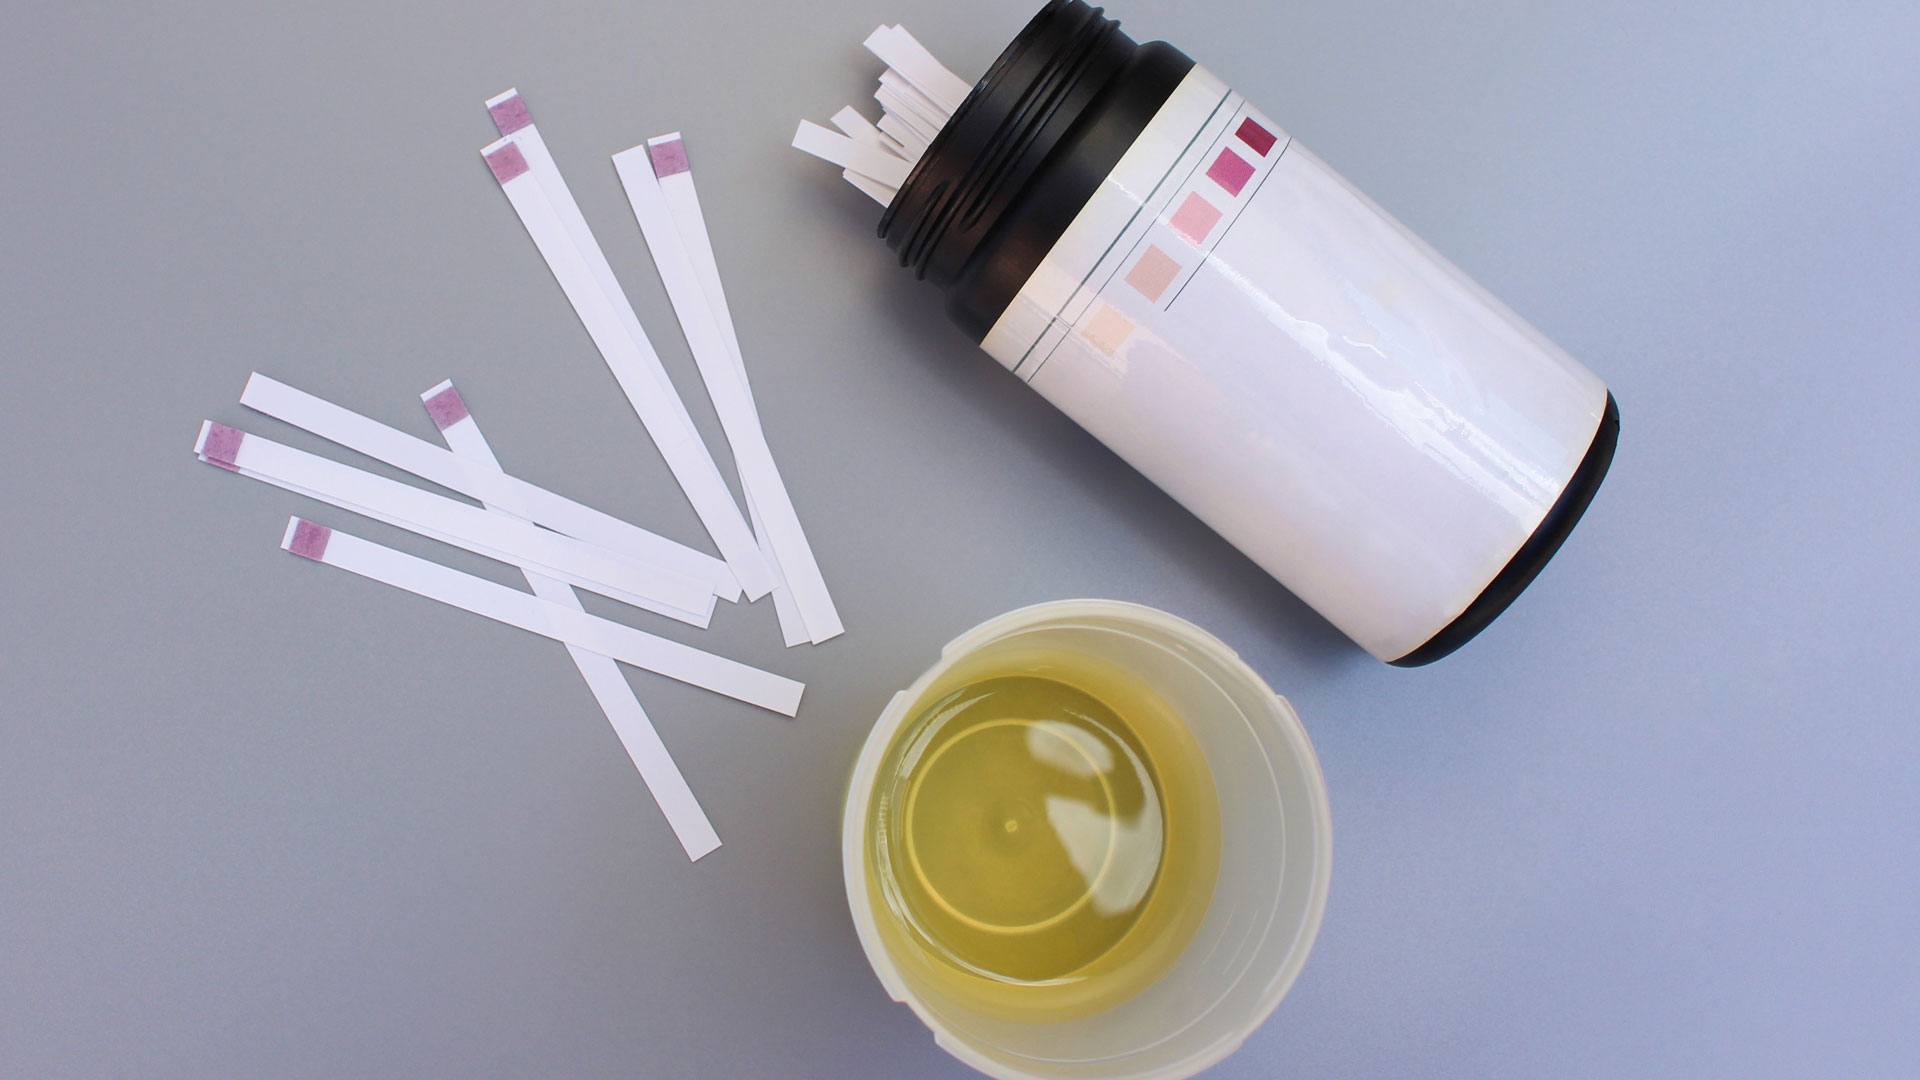 Urine test strips indicate whether or not your body is in ketosis.